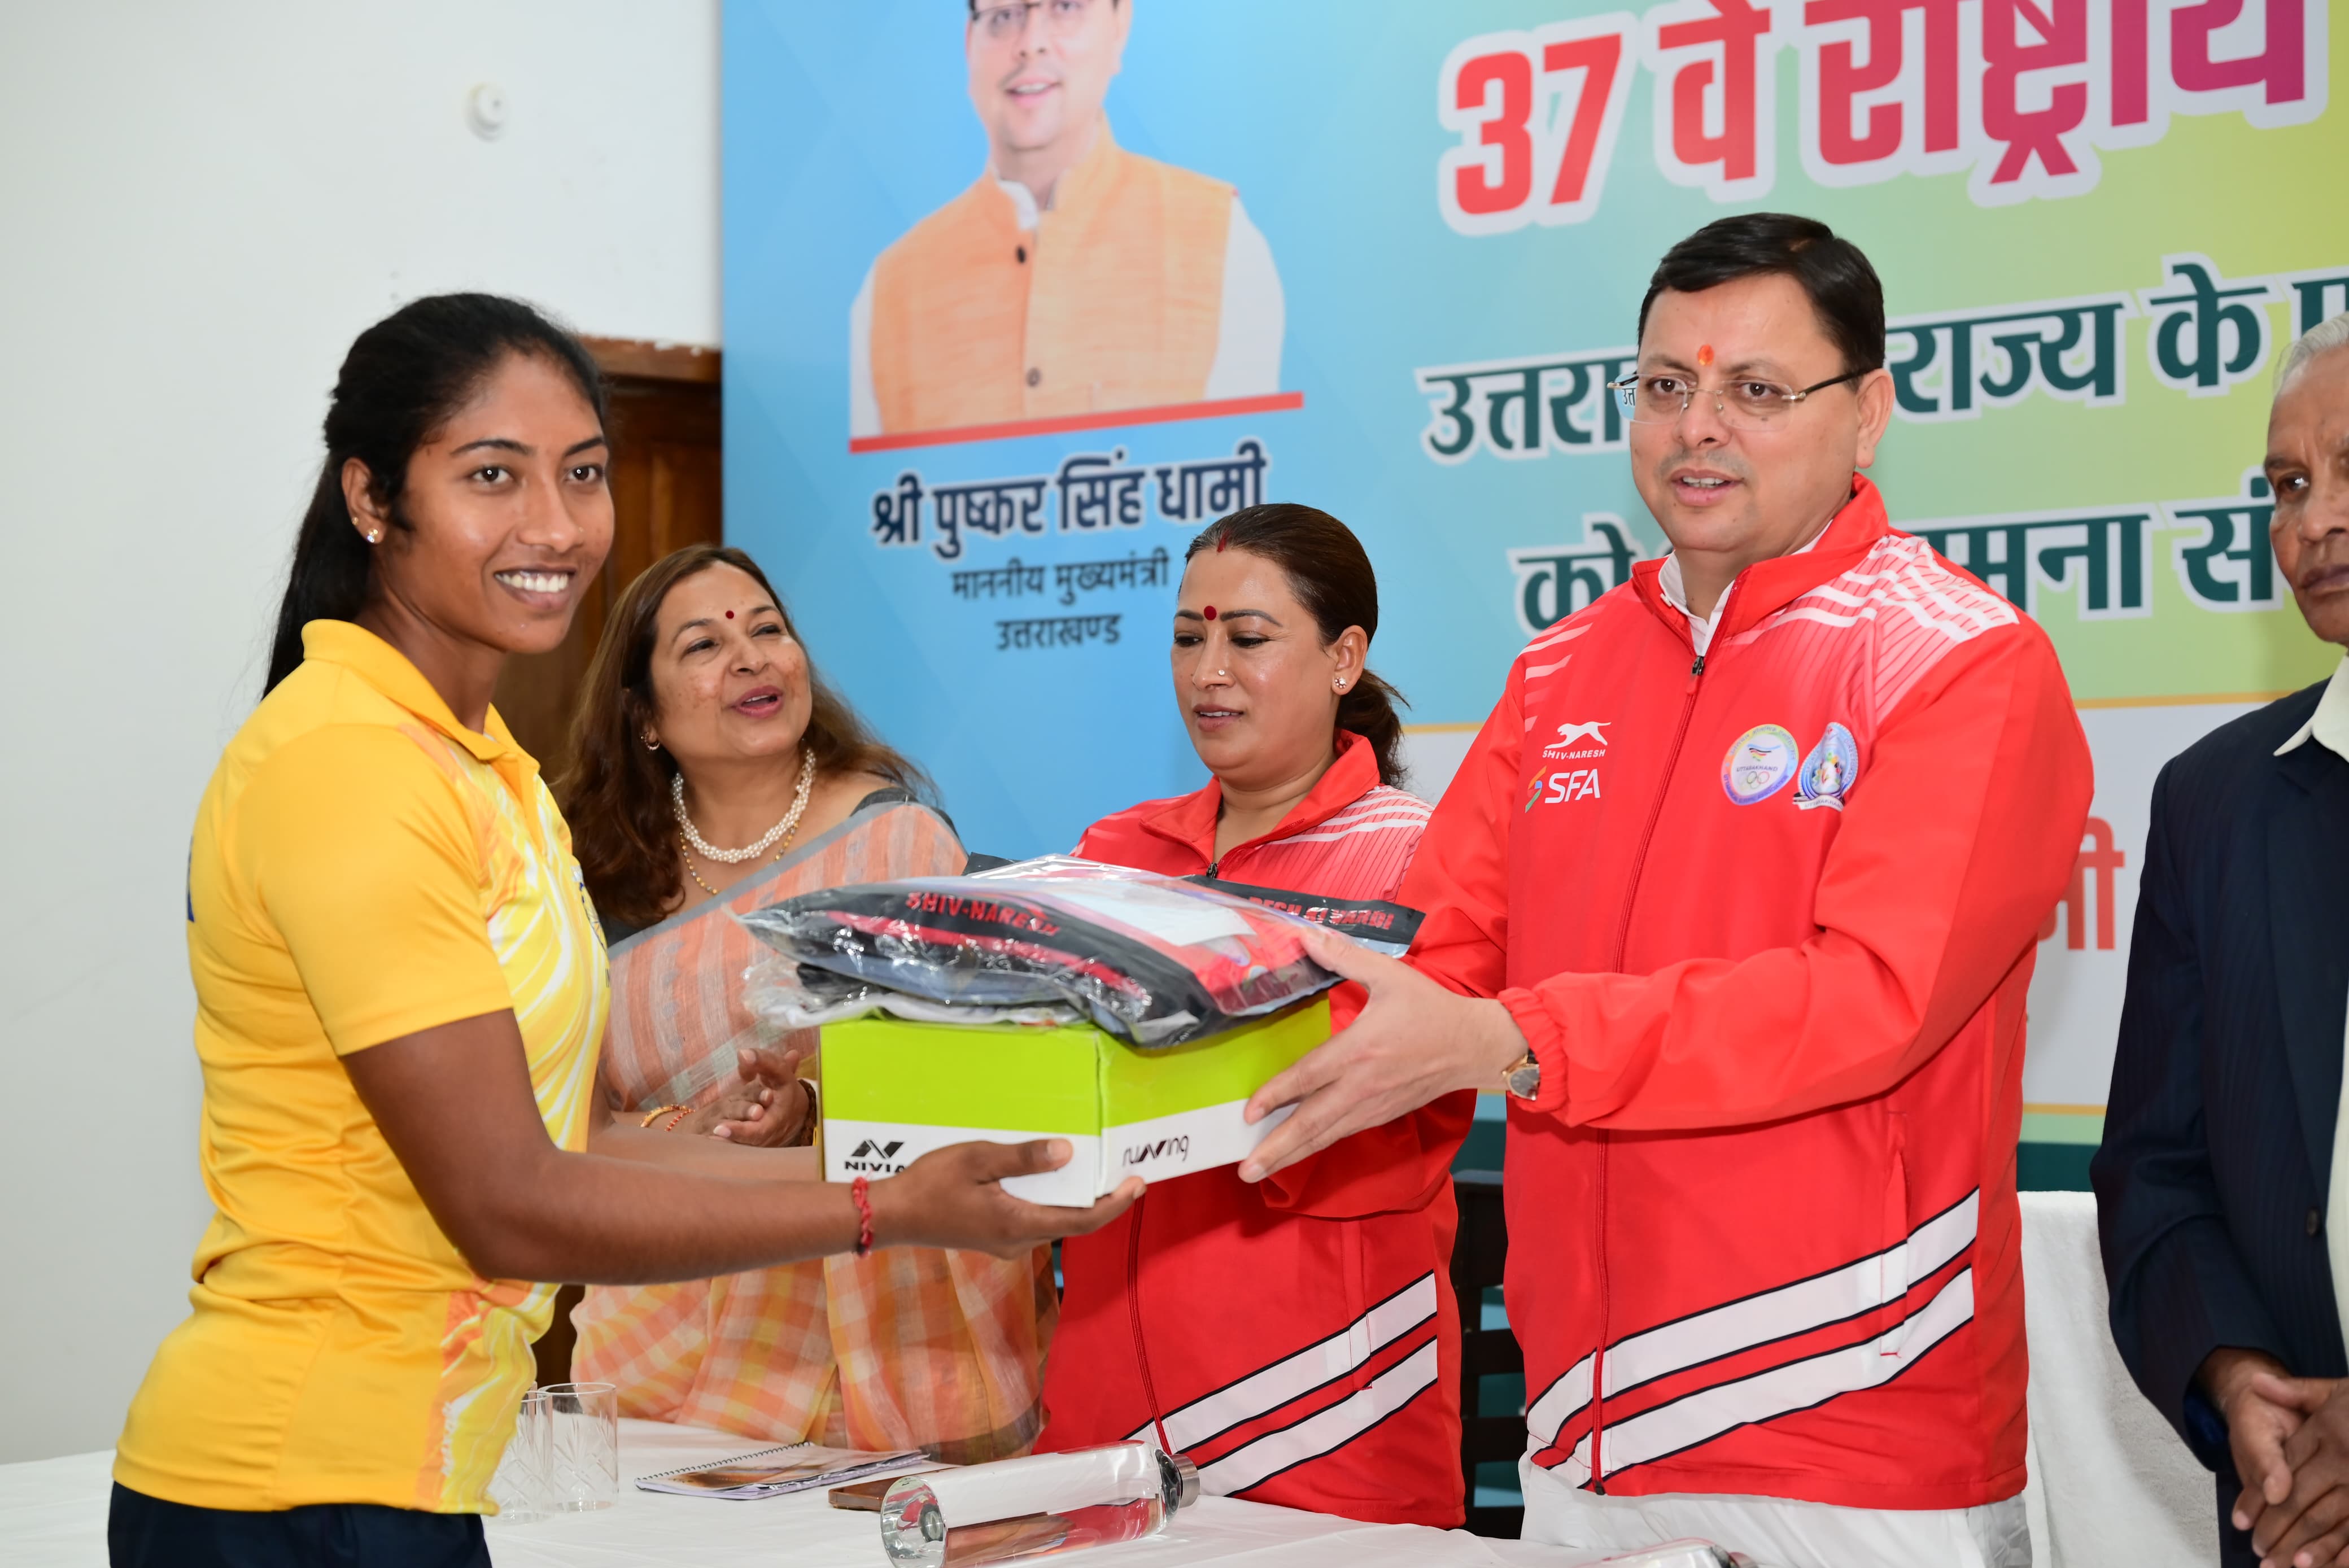 37th National Games in Goa